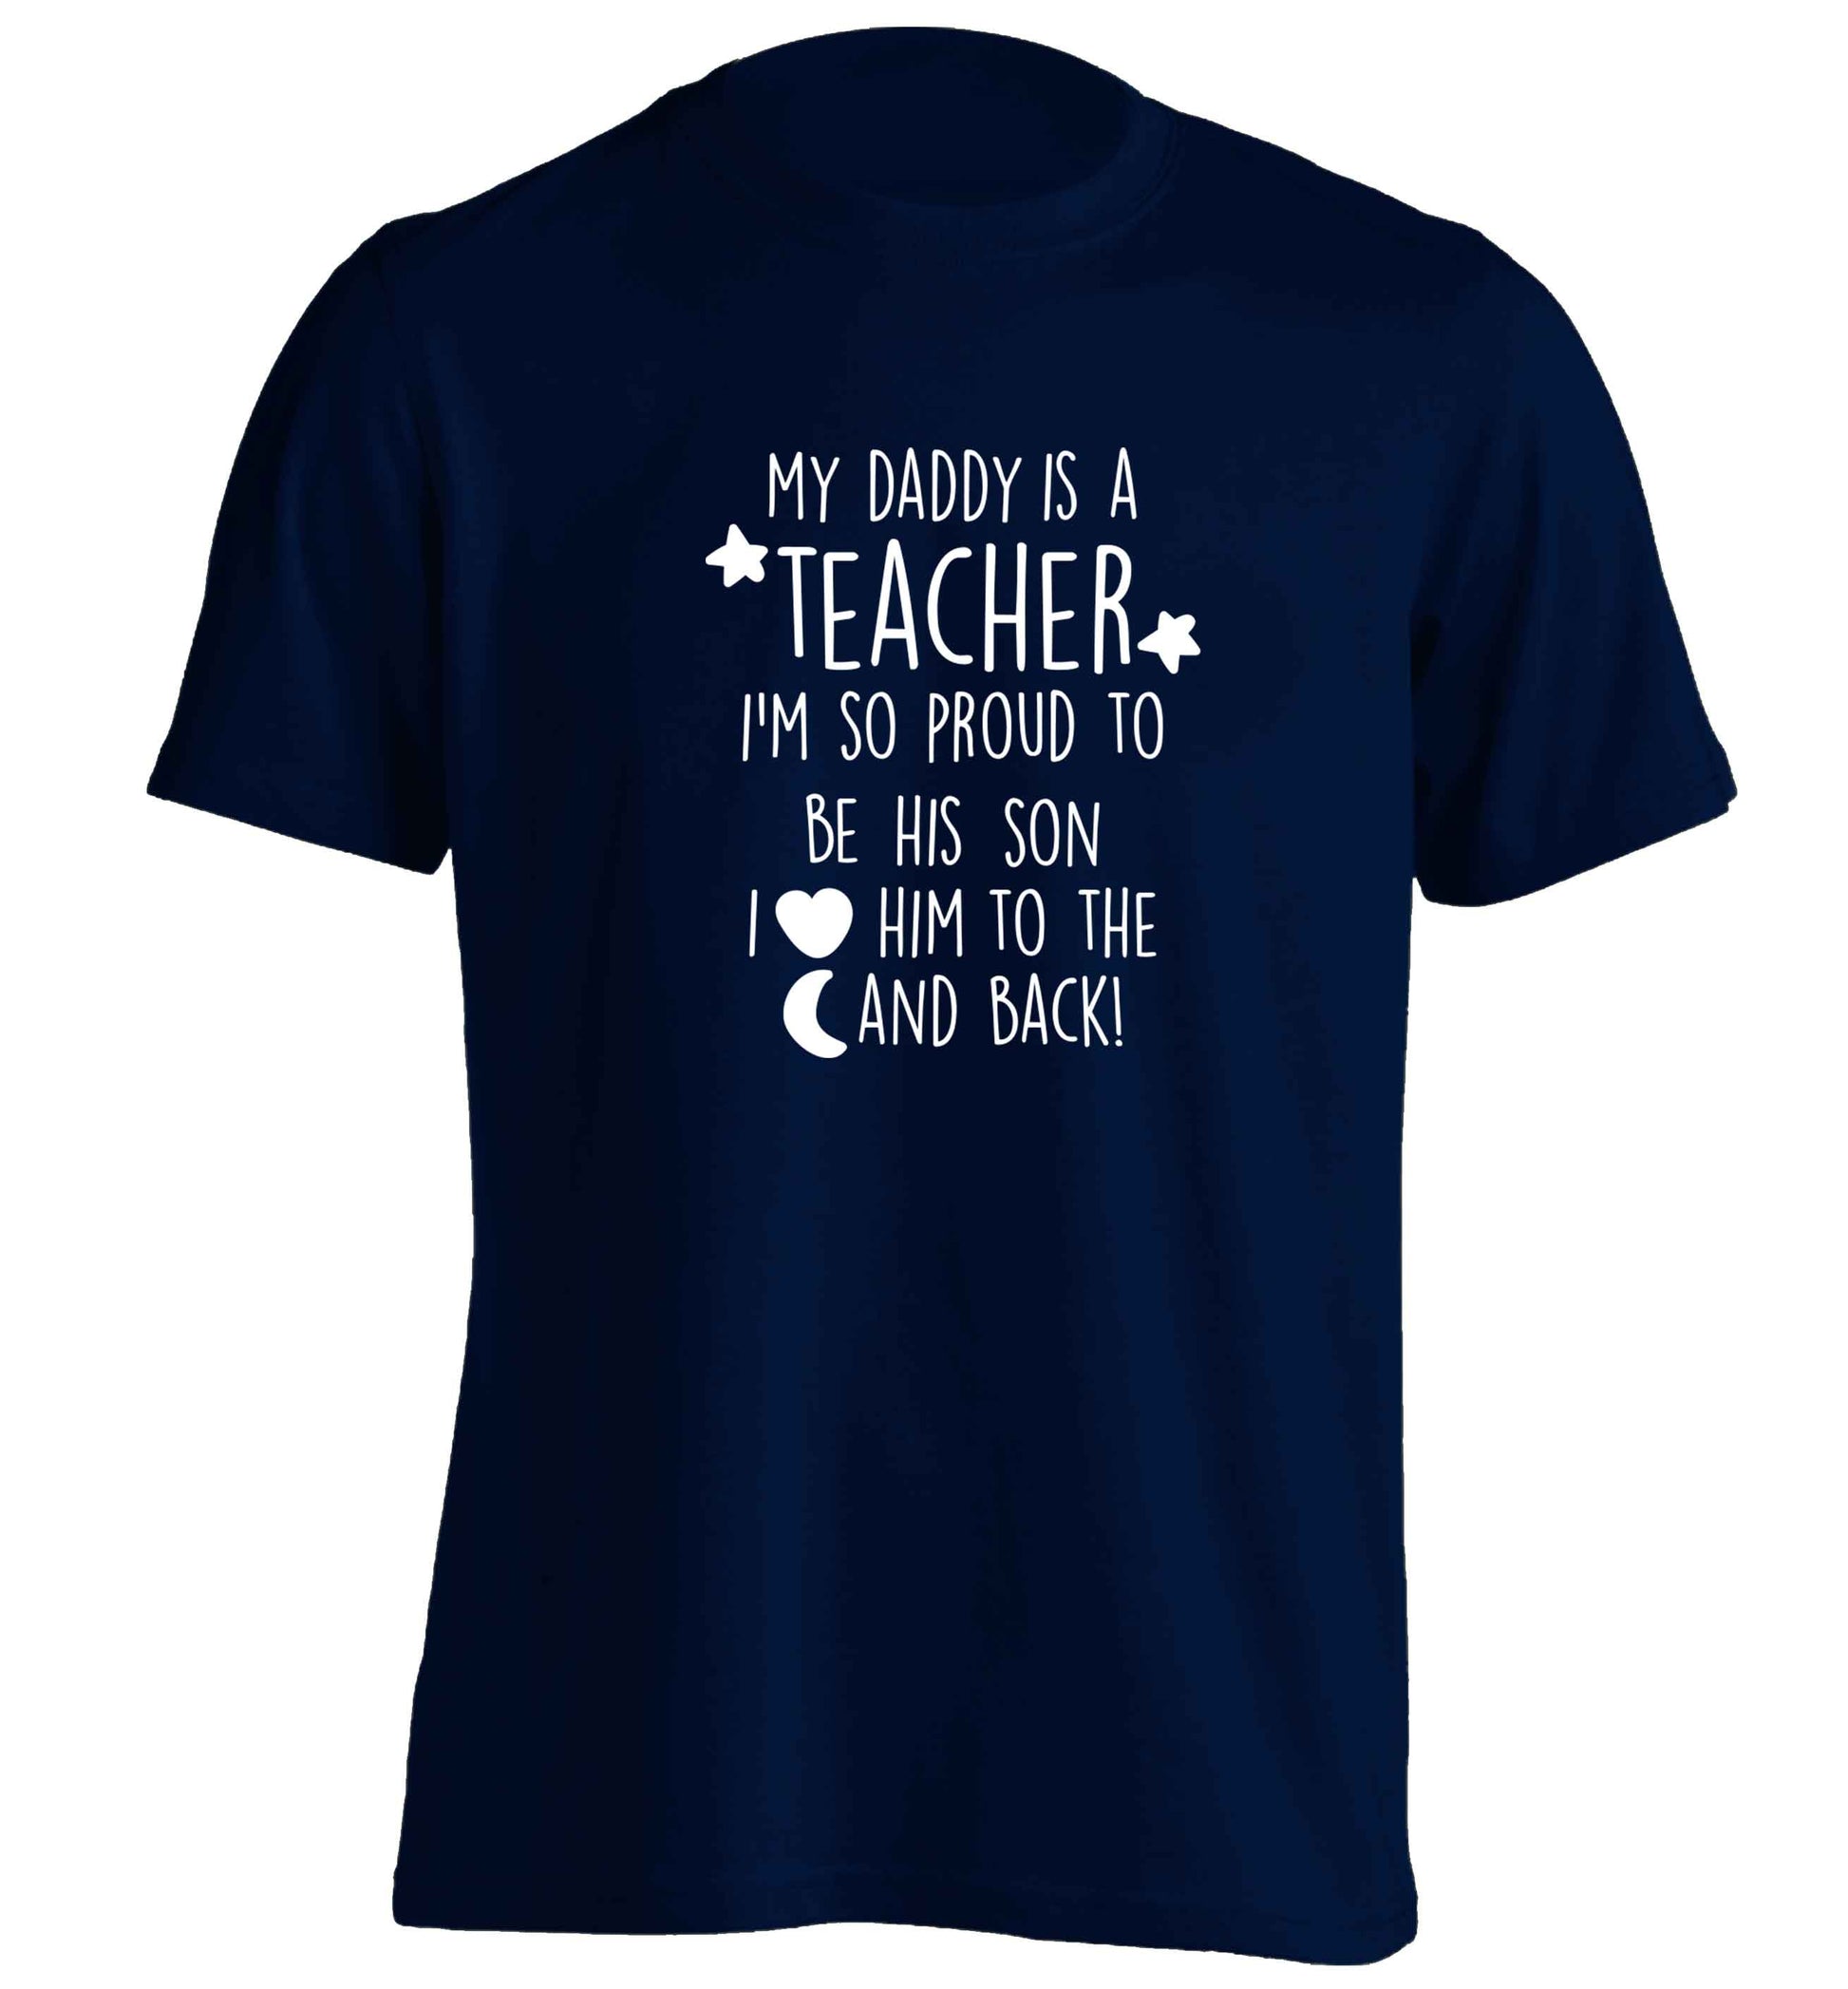 My daddy is a teacher I'm so proud to be his son I love her to the moon and back adults unisex navy Tshirt 2XL